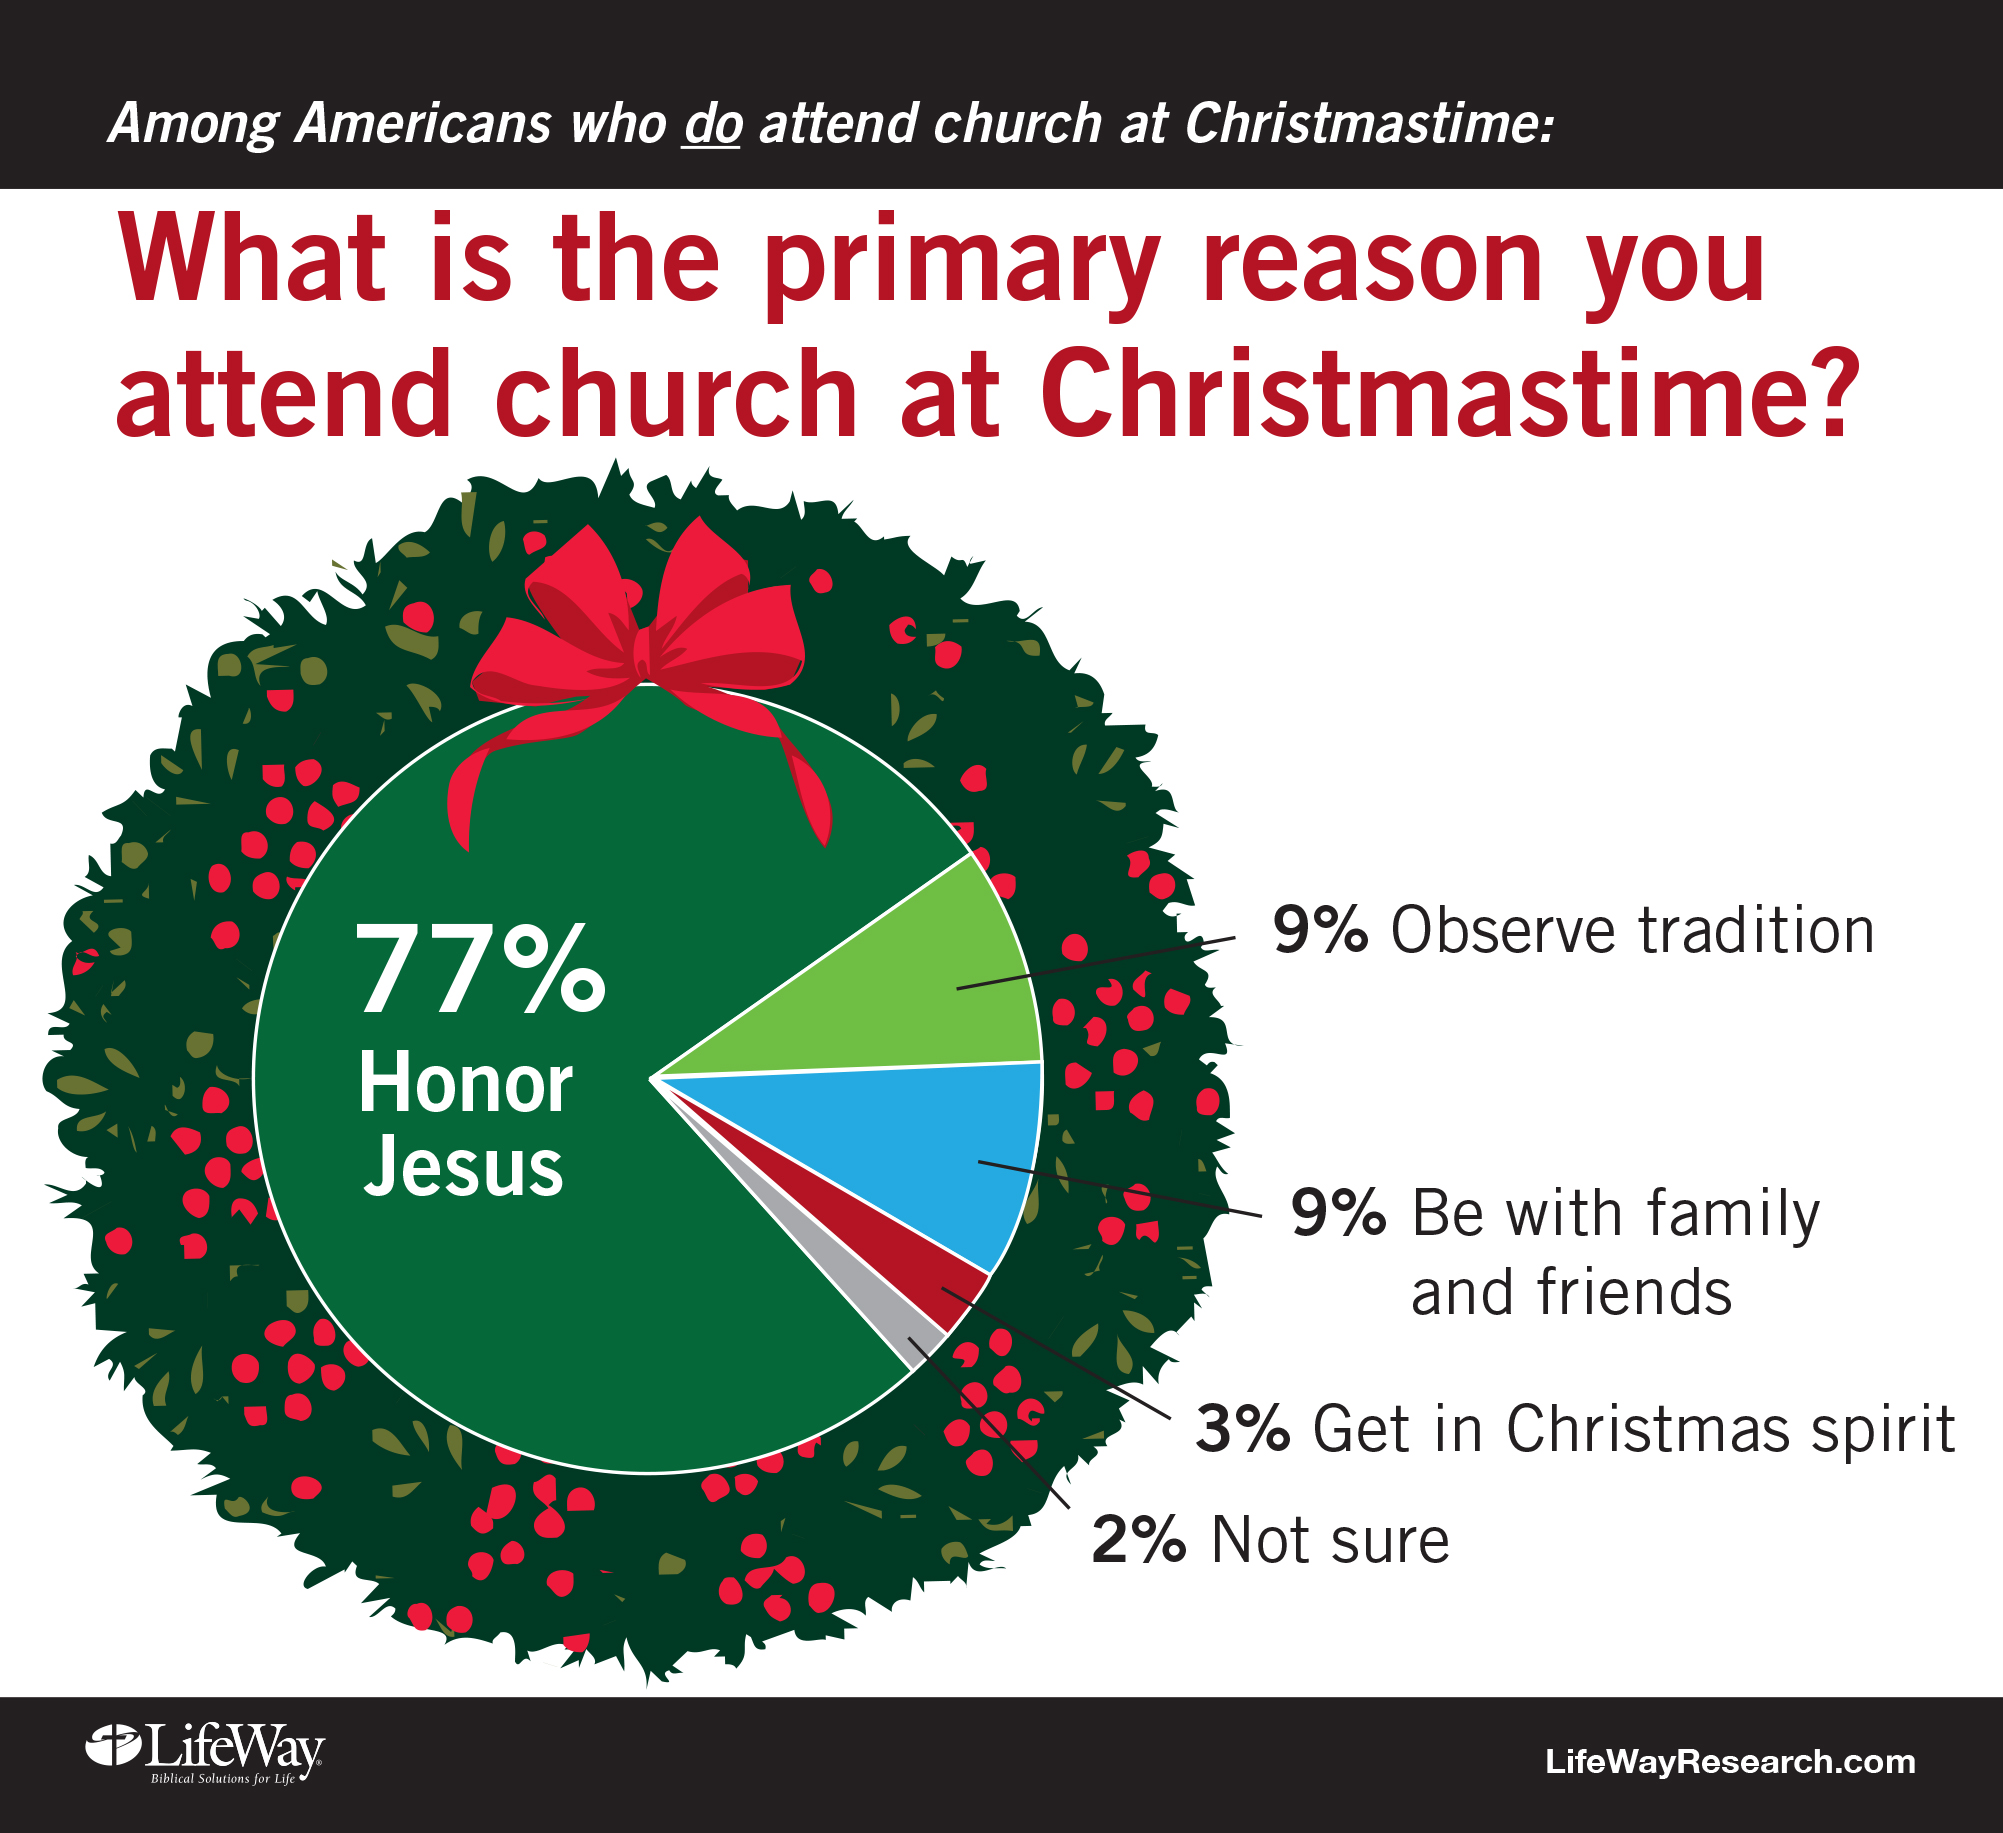 Why should I go to church on Christmas?